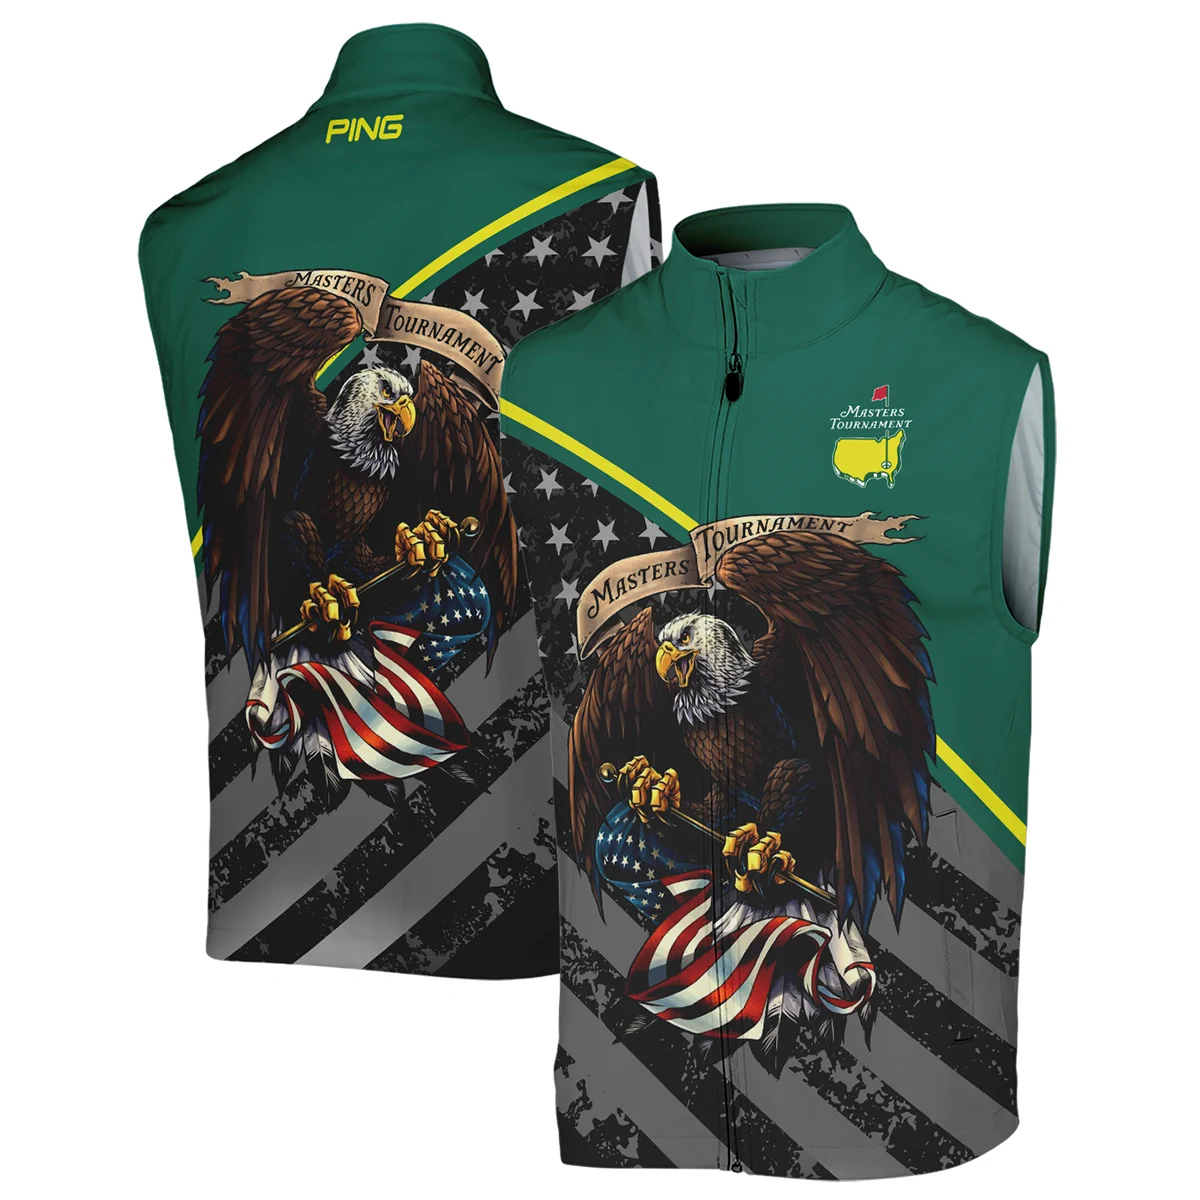 Special Version Golf Masters Tournament Ping Zipper Polo Shirt Egale USA Green Color Golf Sports All Over Print Zipper Polo Shirt For Men